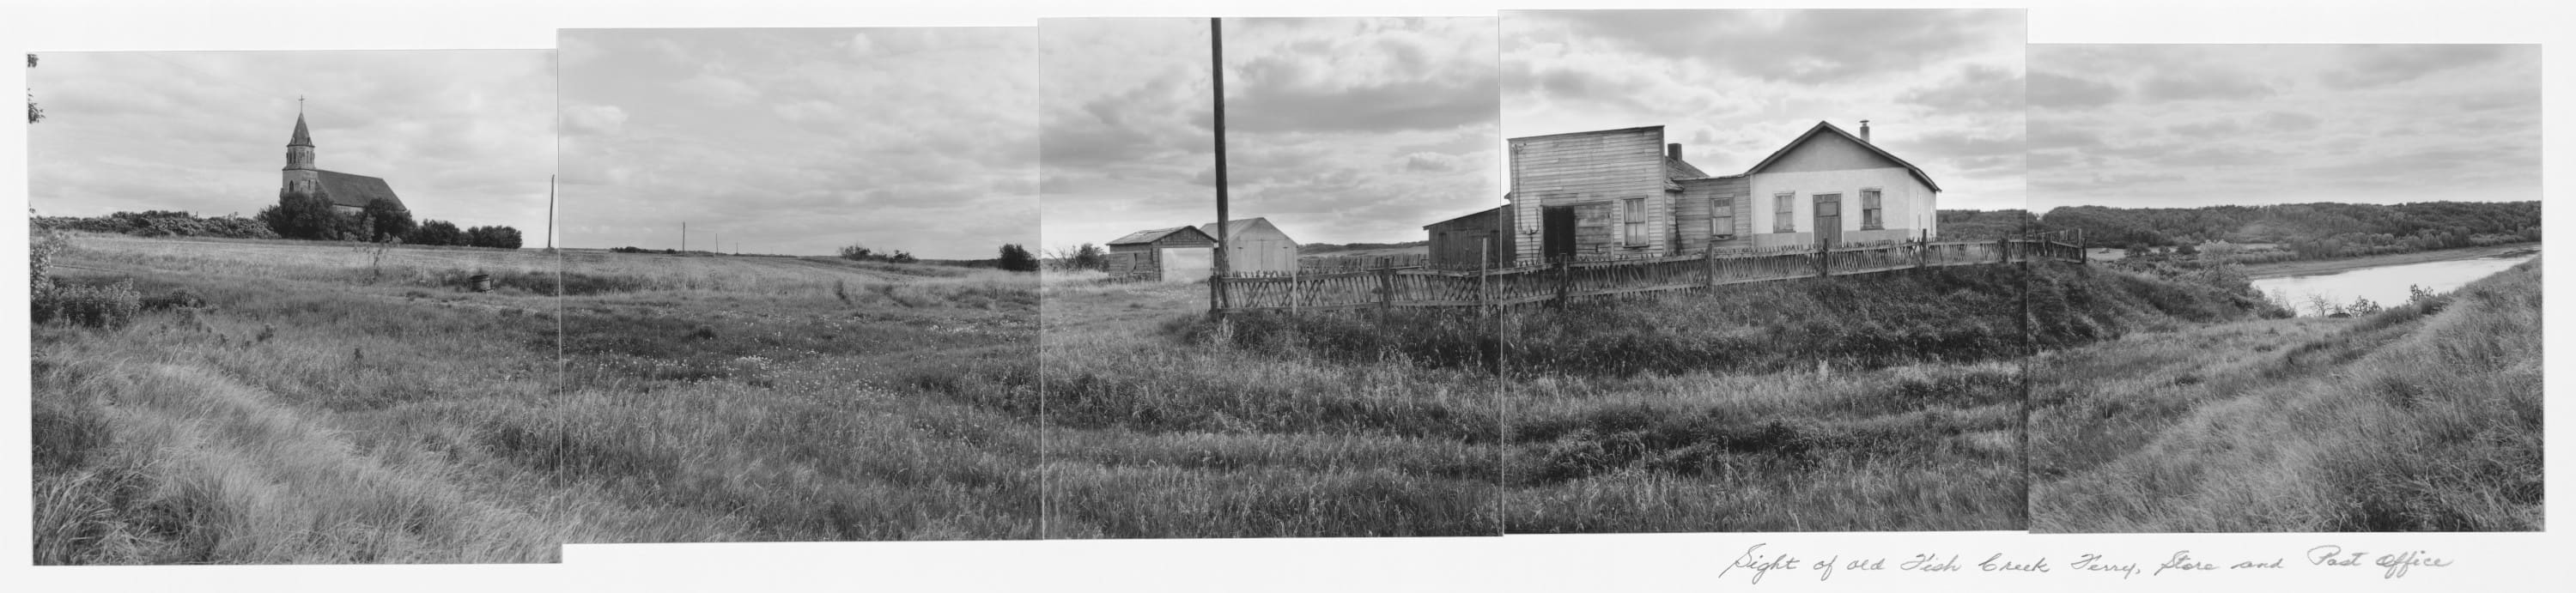 Black and white five panel panorama photo of the site of Fish Creek, including old church, old farm house and barns, and river.